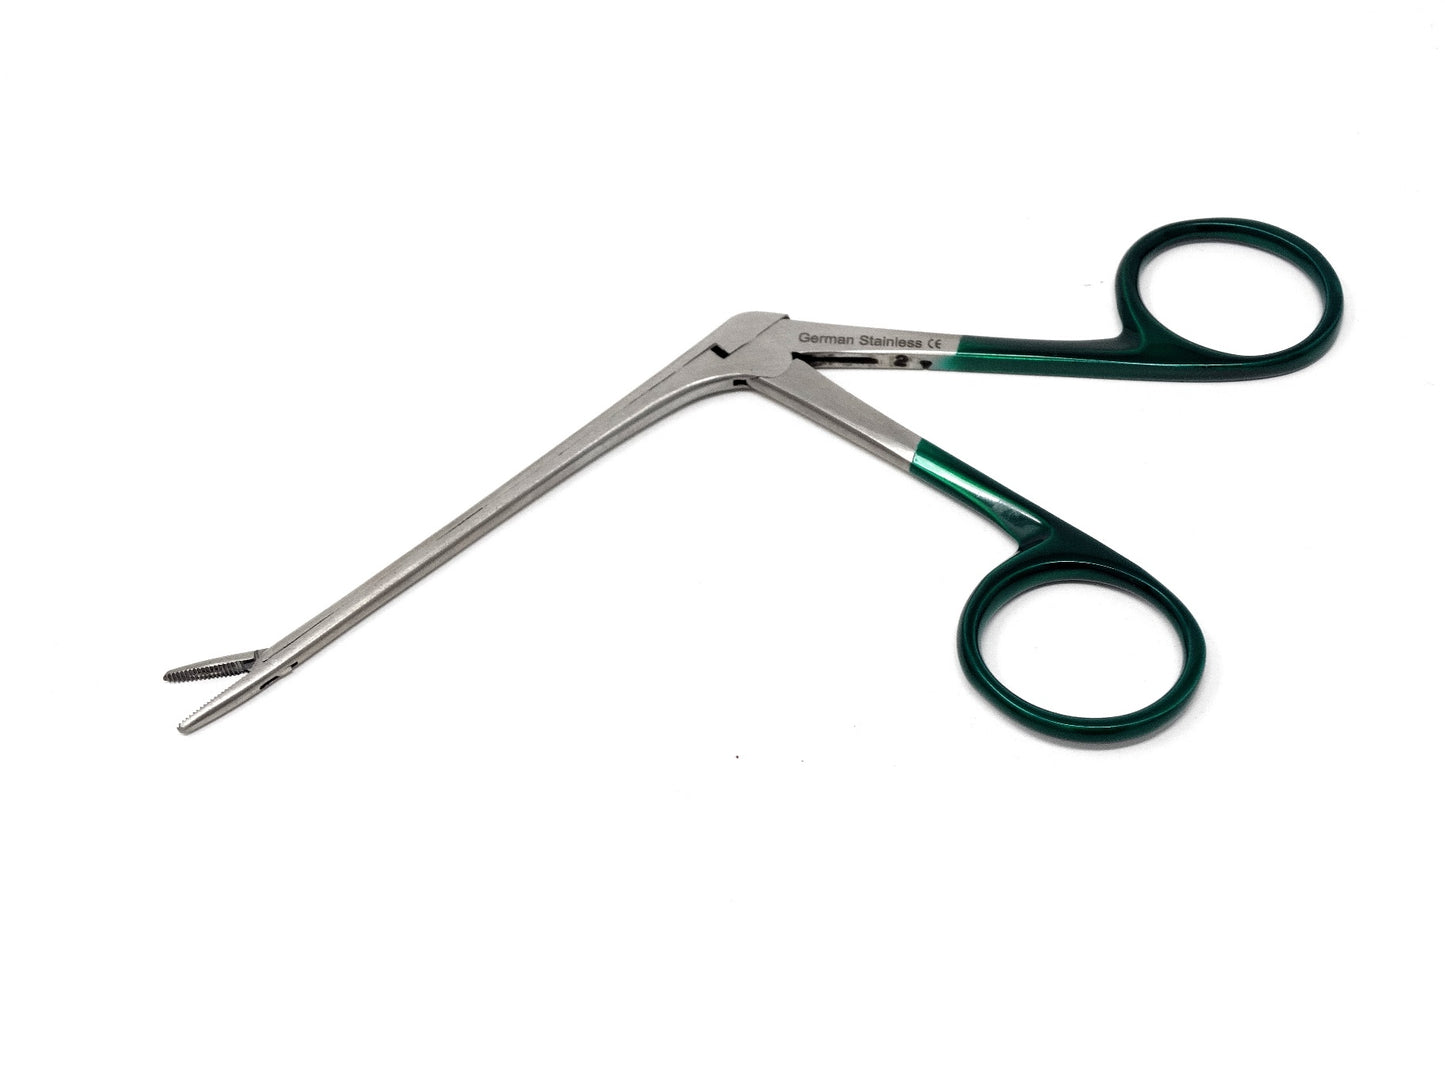 IMS-ALG06 Stainless Steel ENT Small Jaws Alligator Serrated Forceps 3.5" Shank, With Metallic Green Handle